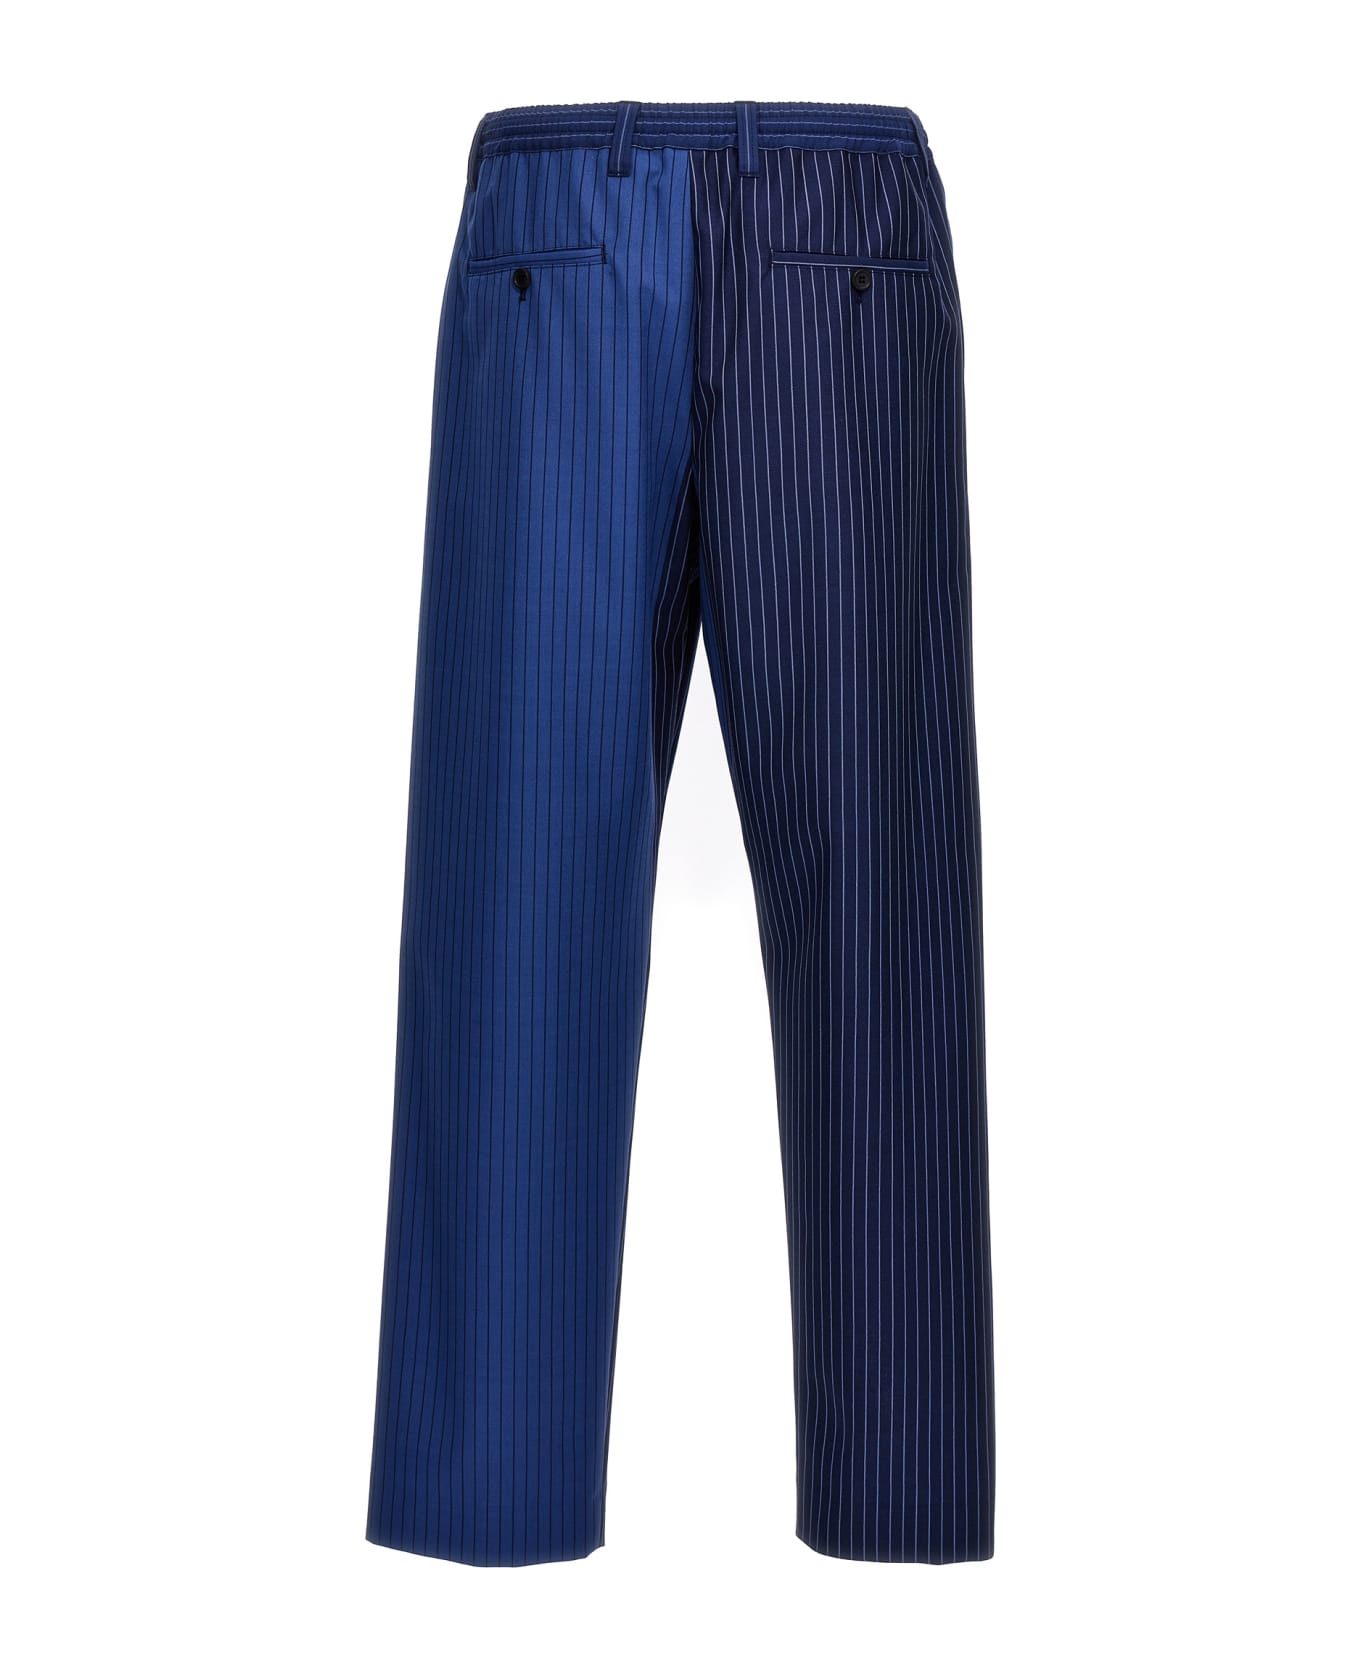 Marni Striped Trousers - Blue ボトムス